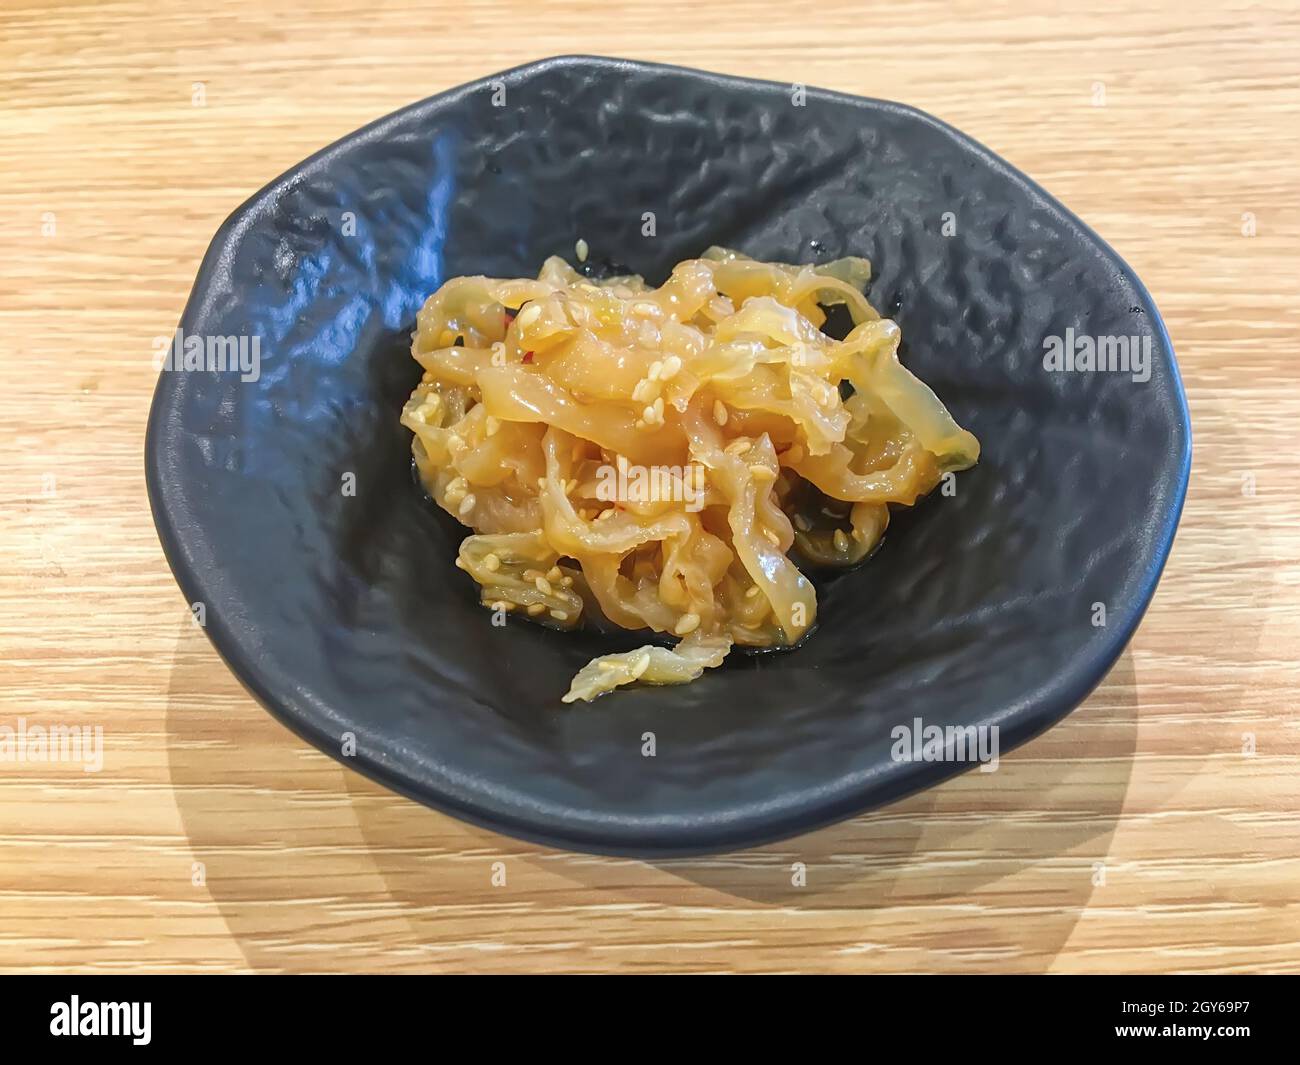 Jellyfish salad in black plate on the wood table. Stock Photo